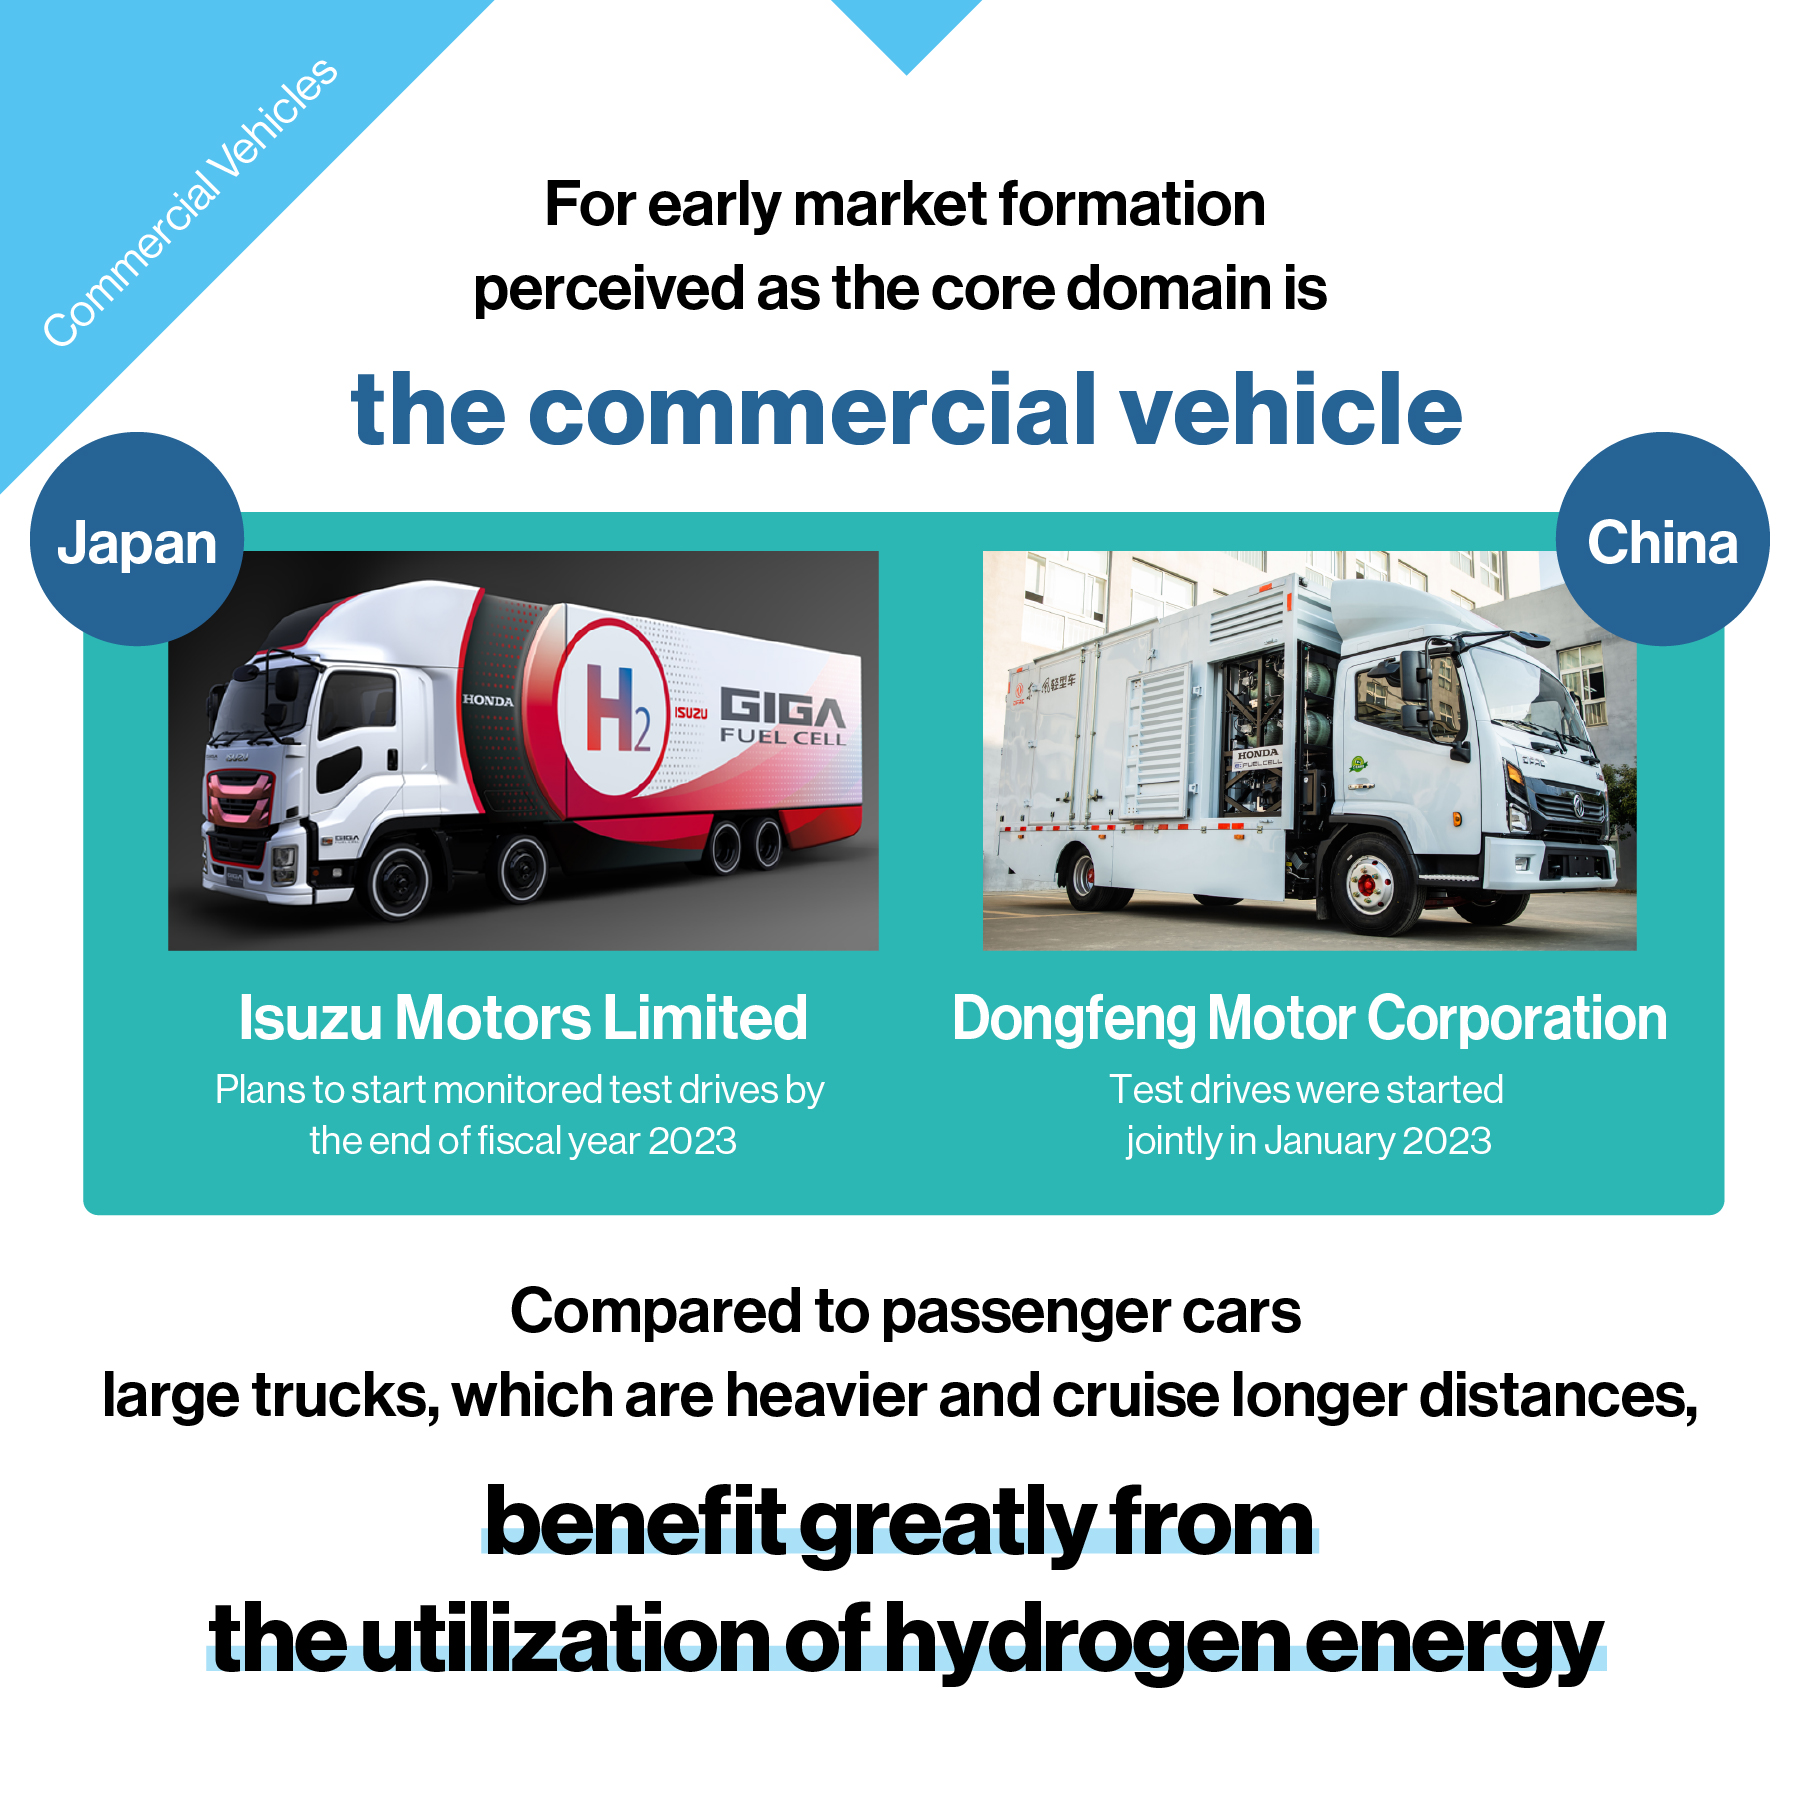 There are great benefits of hydrogen energy for commercial vehicles